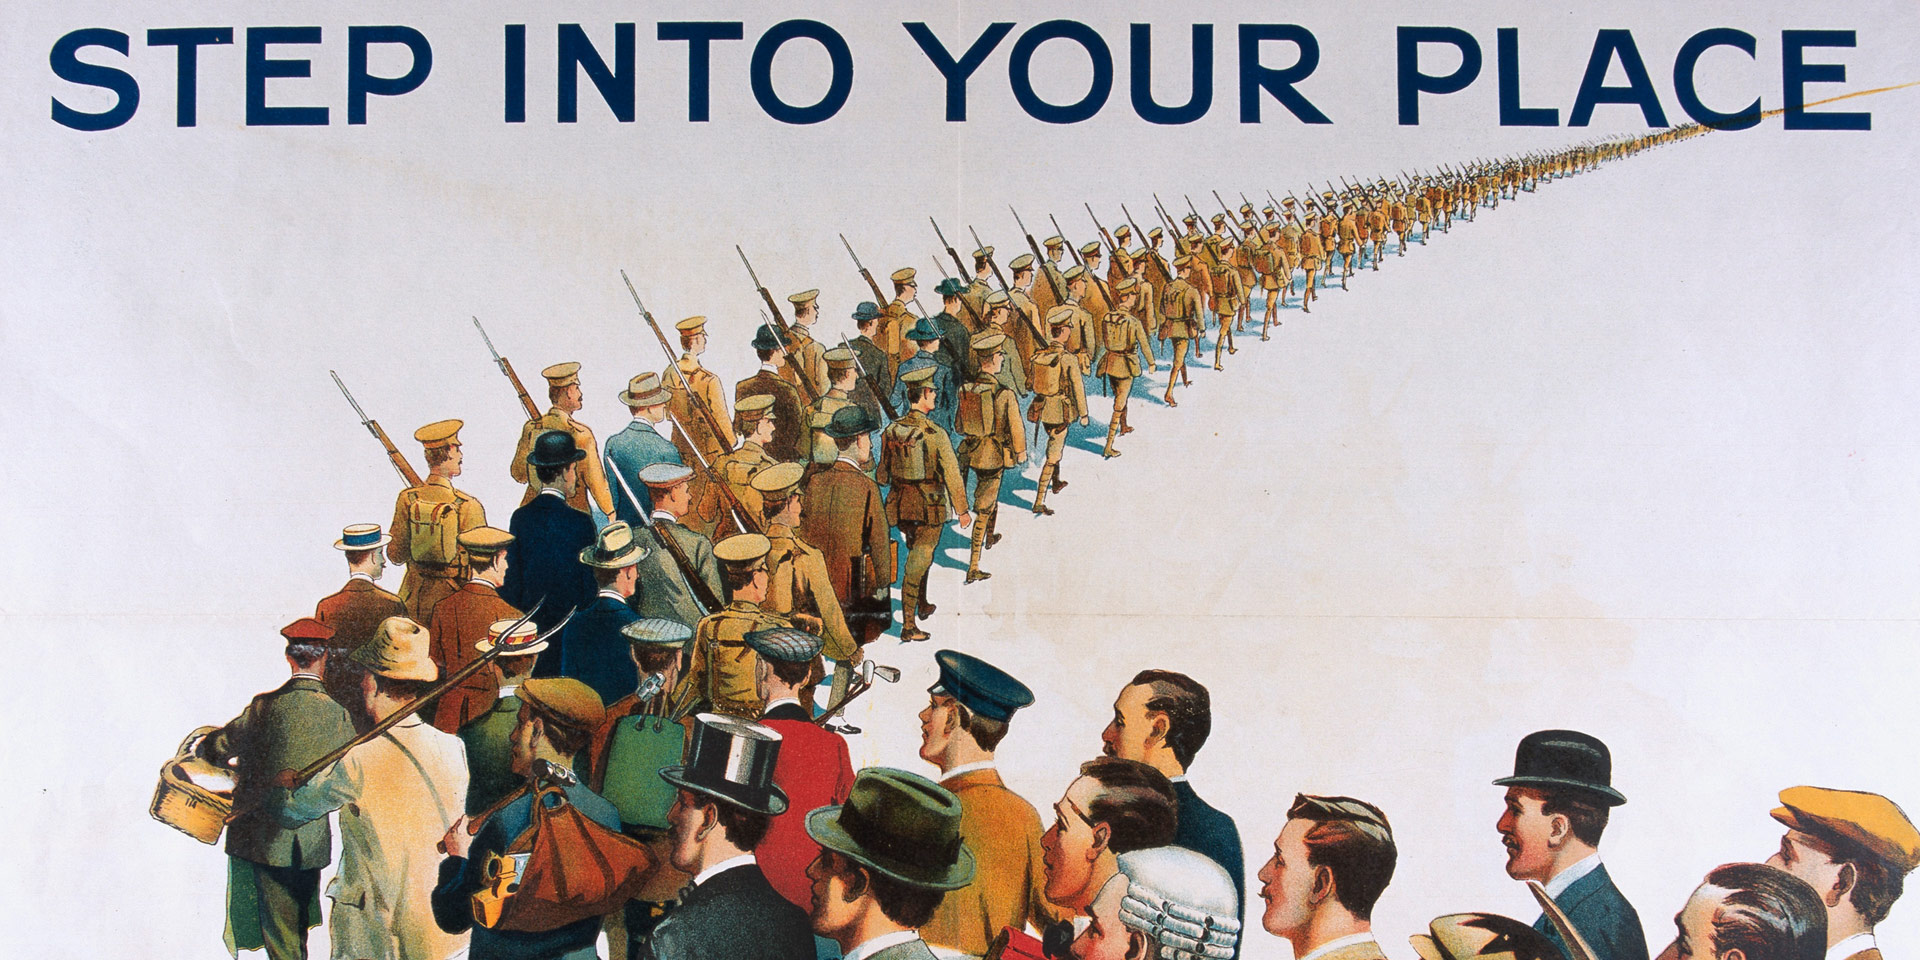 First World War recruiting poster showing a line of civilians turning into soldiers